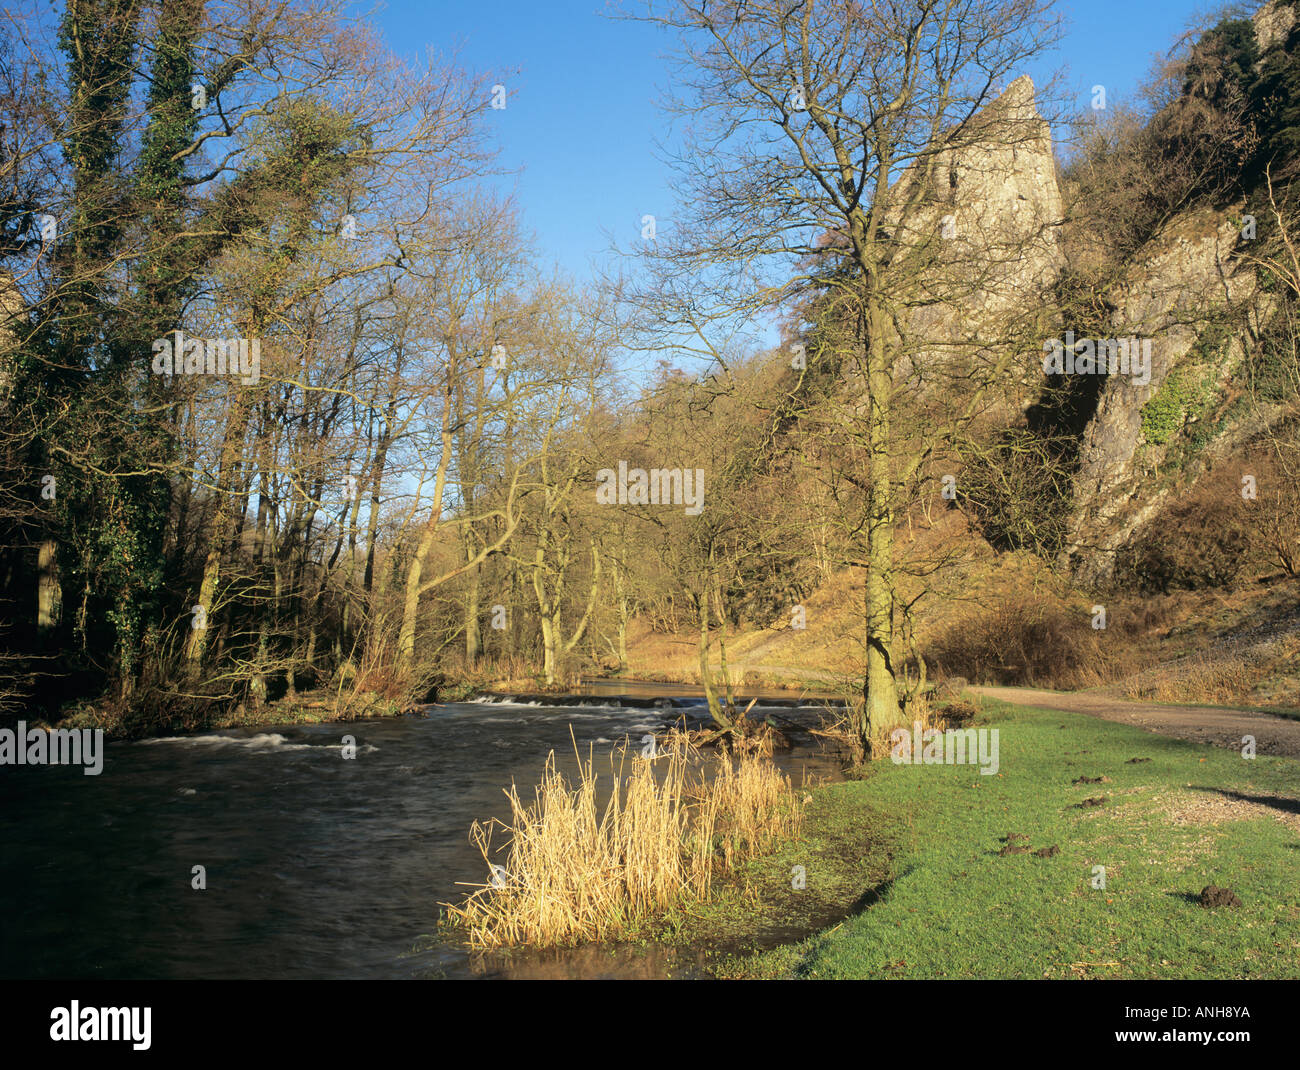 DOVEDALE gorge River Dove with path near Tissington Spires in White Peak of Peak District National Park Derbyshire England UK Stock Photo